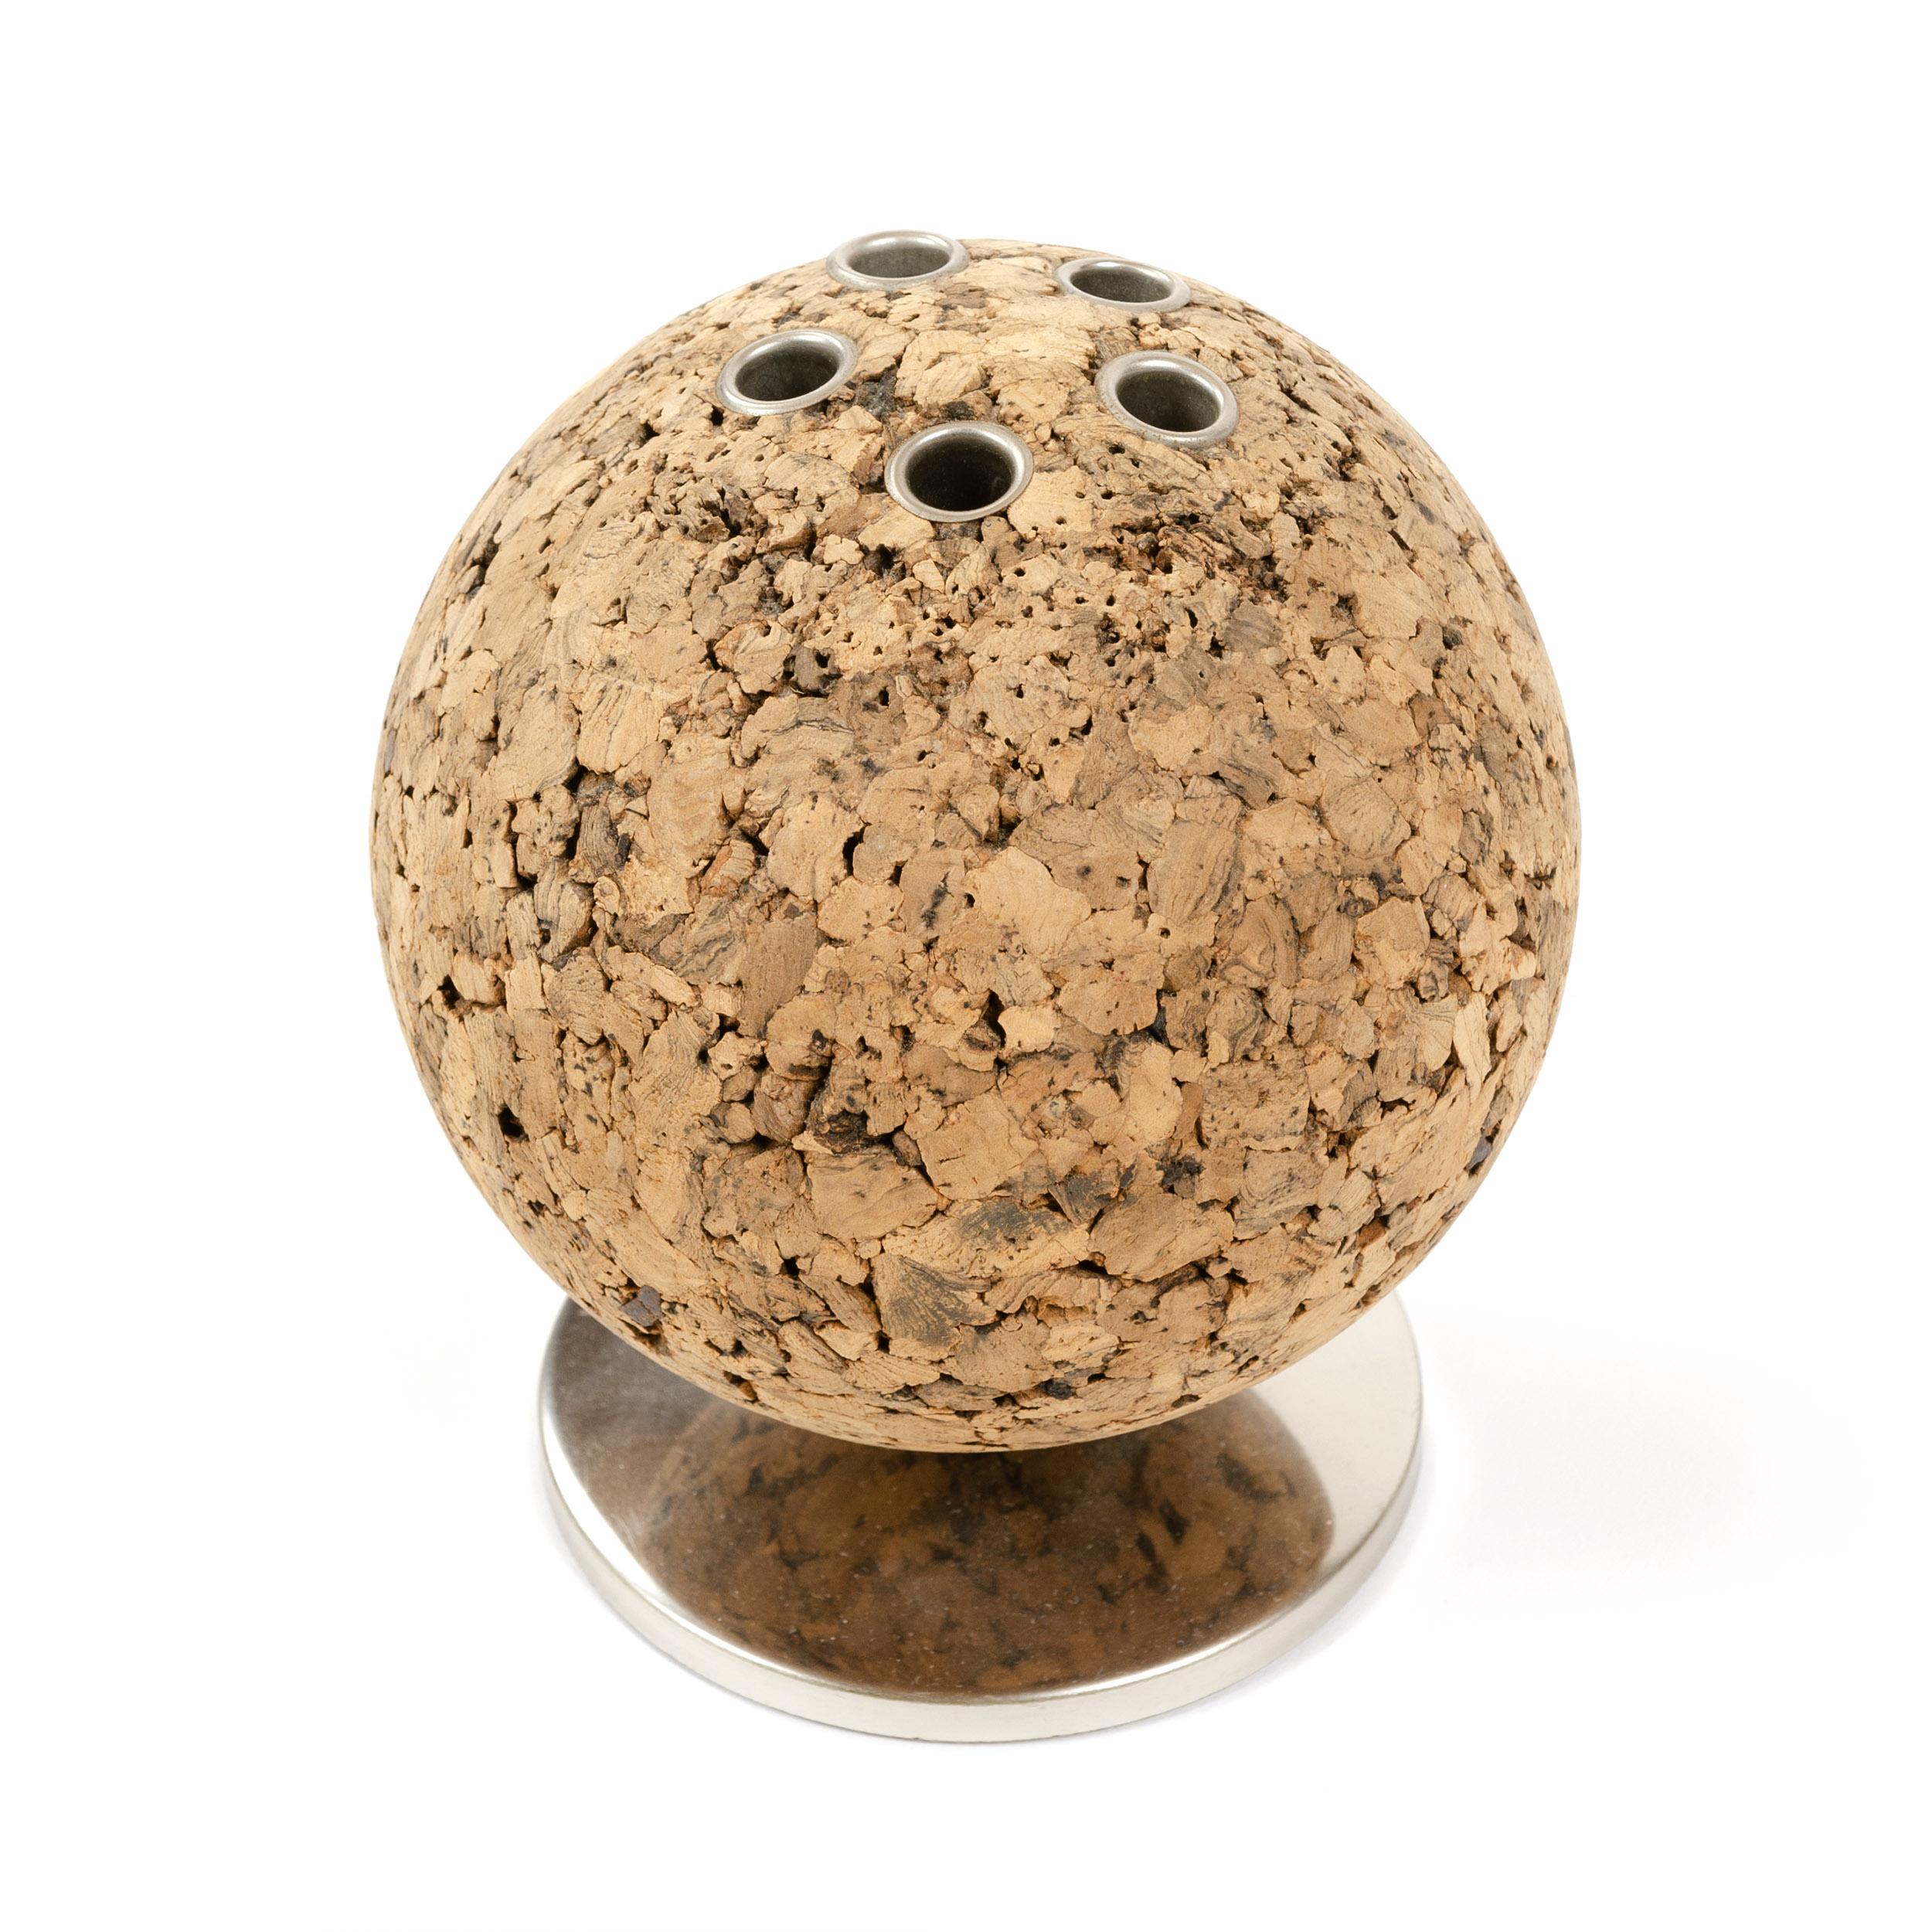 A swiveling 'Bulletin Ball' cork desk organizer for pens and pencils. Designed and produced by Park Sherman in the USA, circa 1960s.